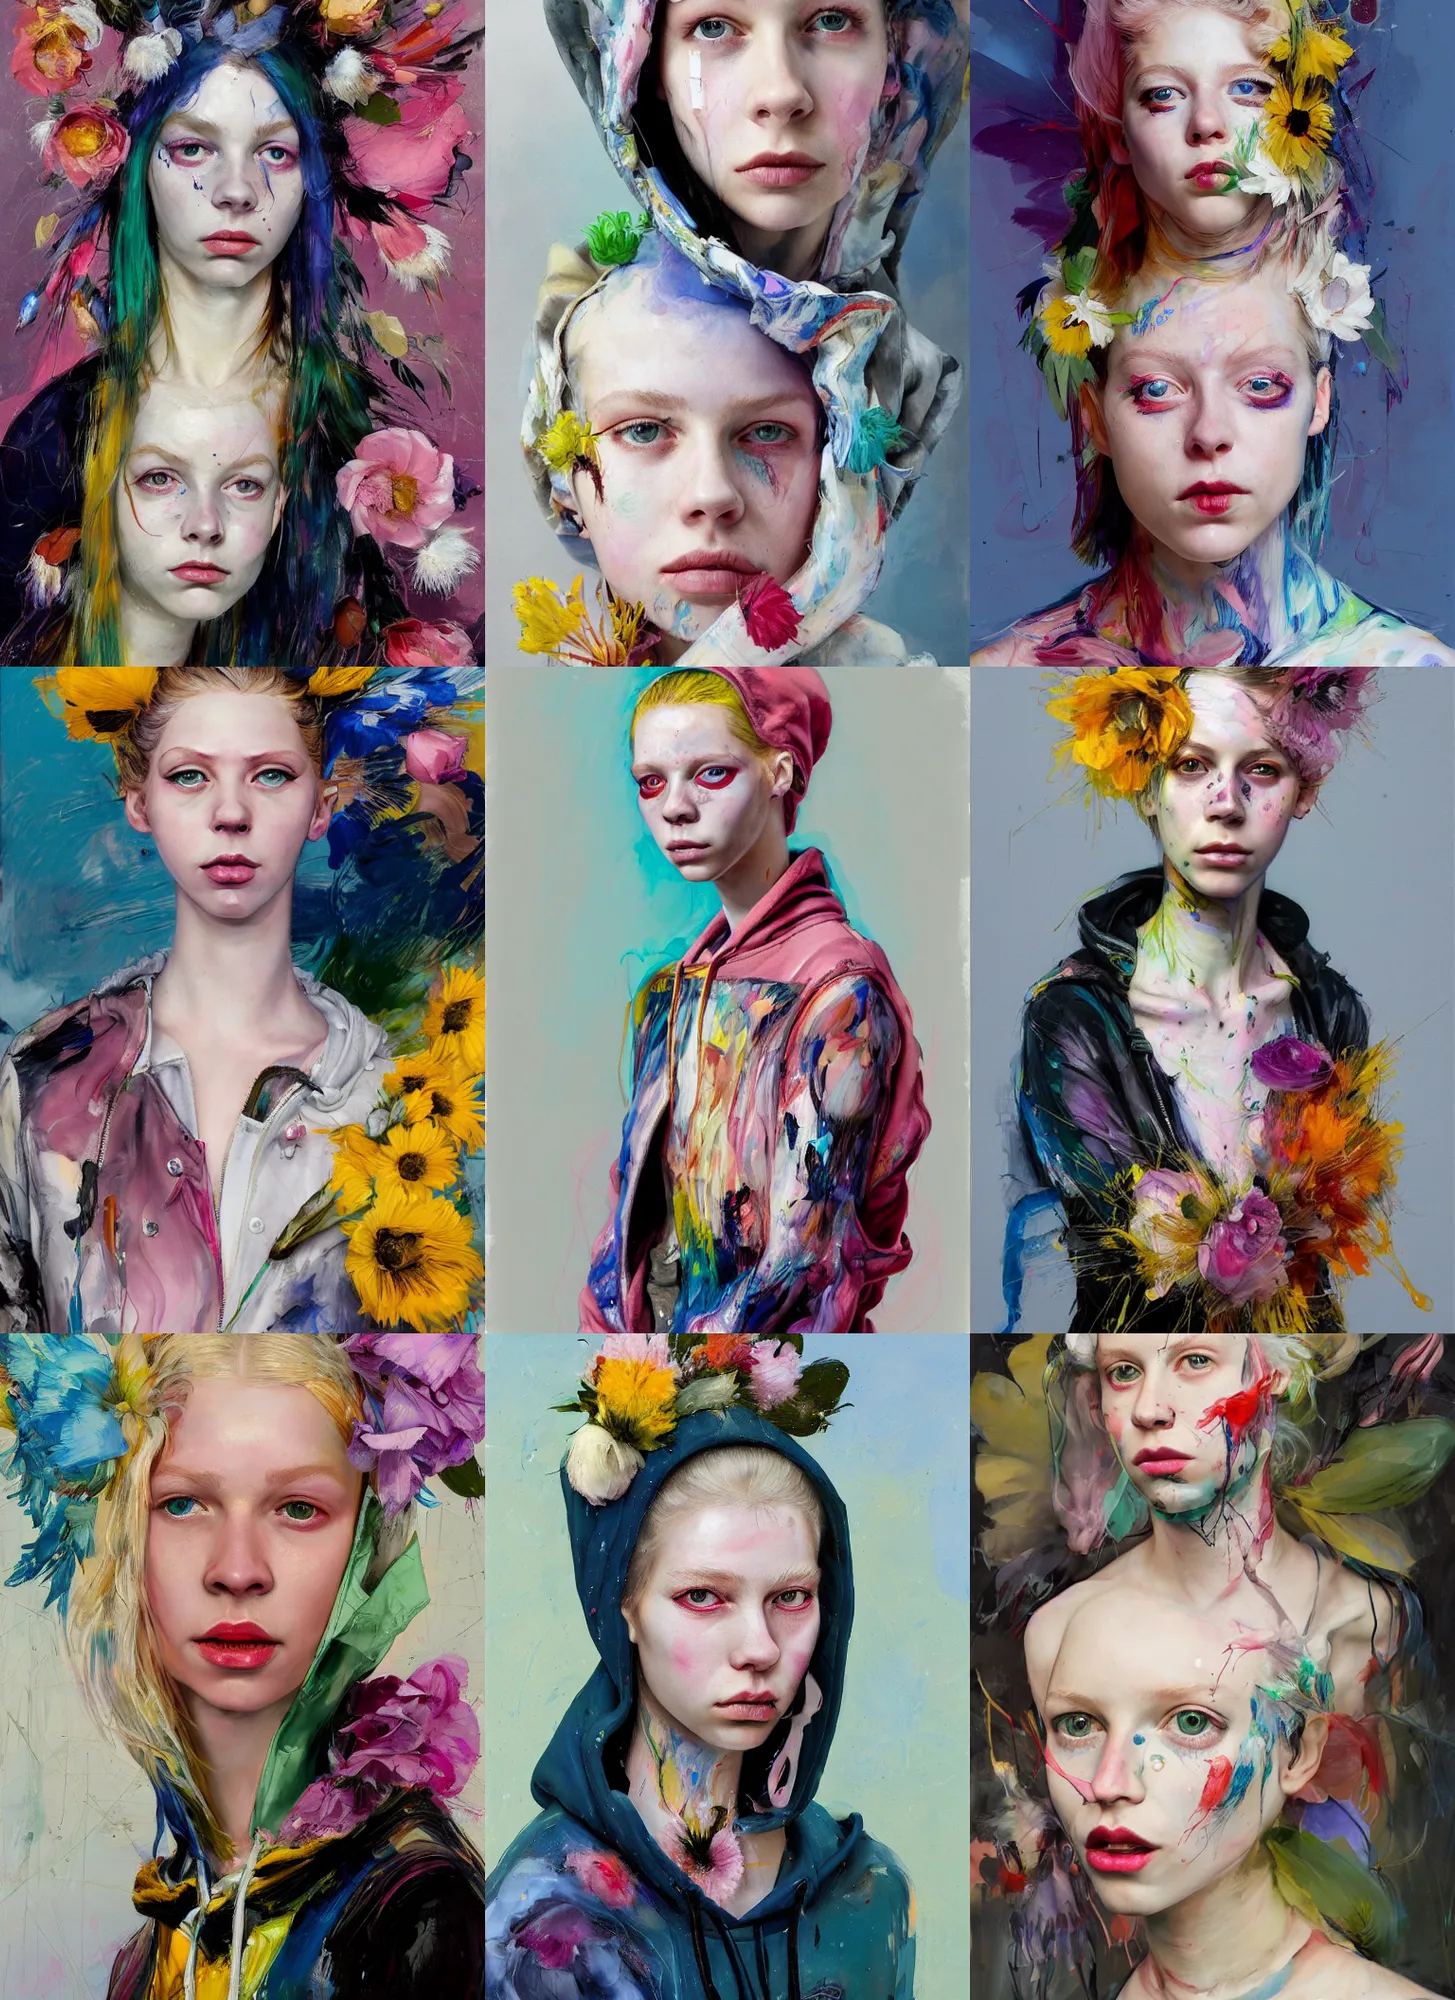 Prompt: 2 5 year old hunter schafer in the style of martine johanna and! jenny saville!, wearing a hoodie, standing in a township street, street fashion outfit, haute couture fashion shoot, mascara, full figure painting by john berkey, jeremy mann, joaquin sorolla, decorative flowers, 2 4 mm, die antwoord yolandi visser